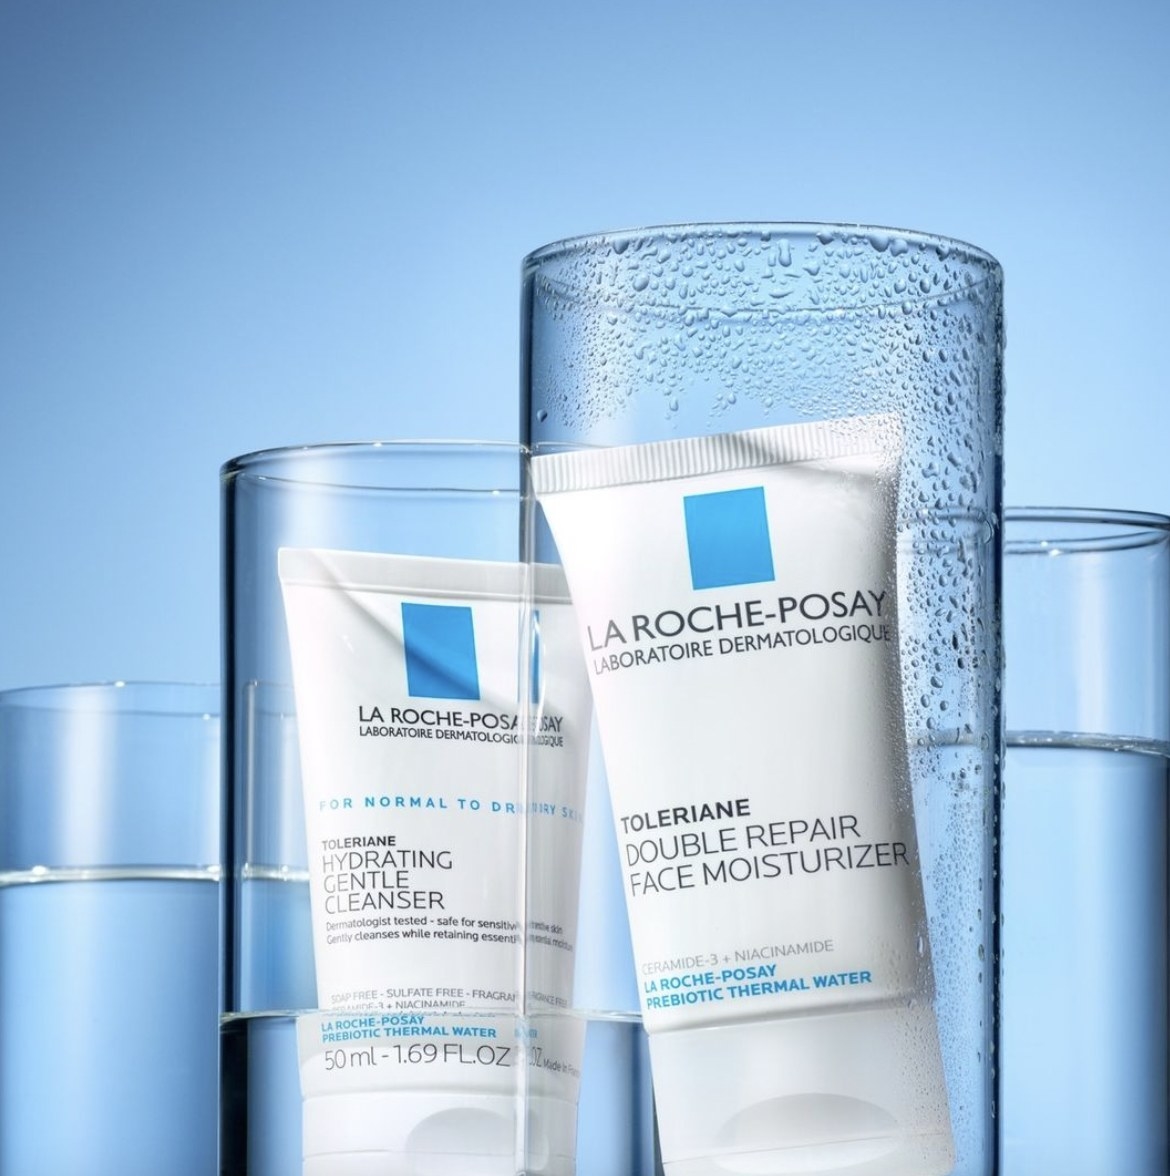 A tube of face moisturizer in a glass